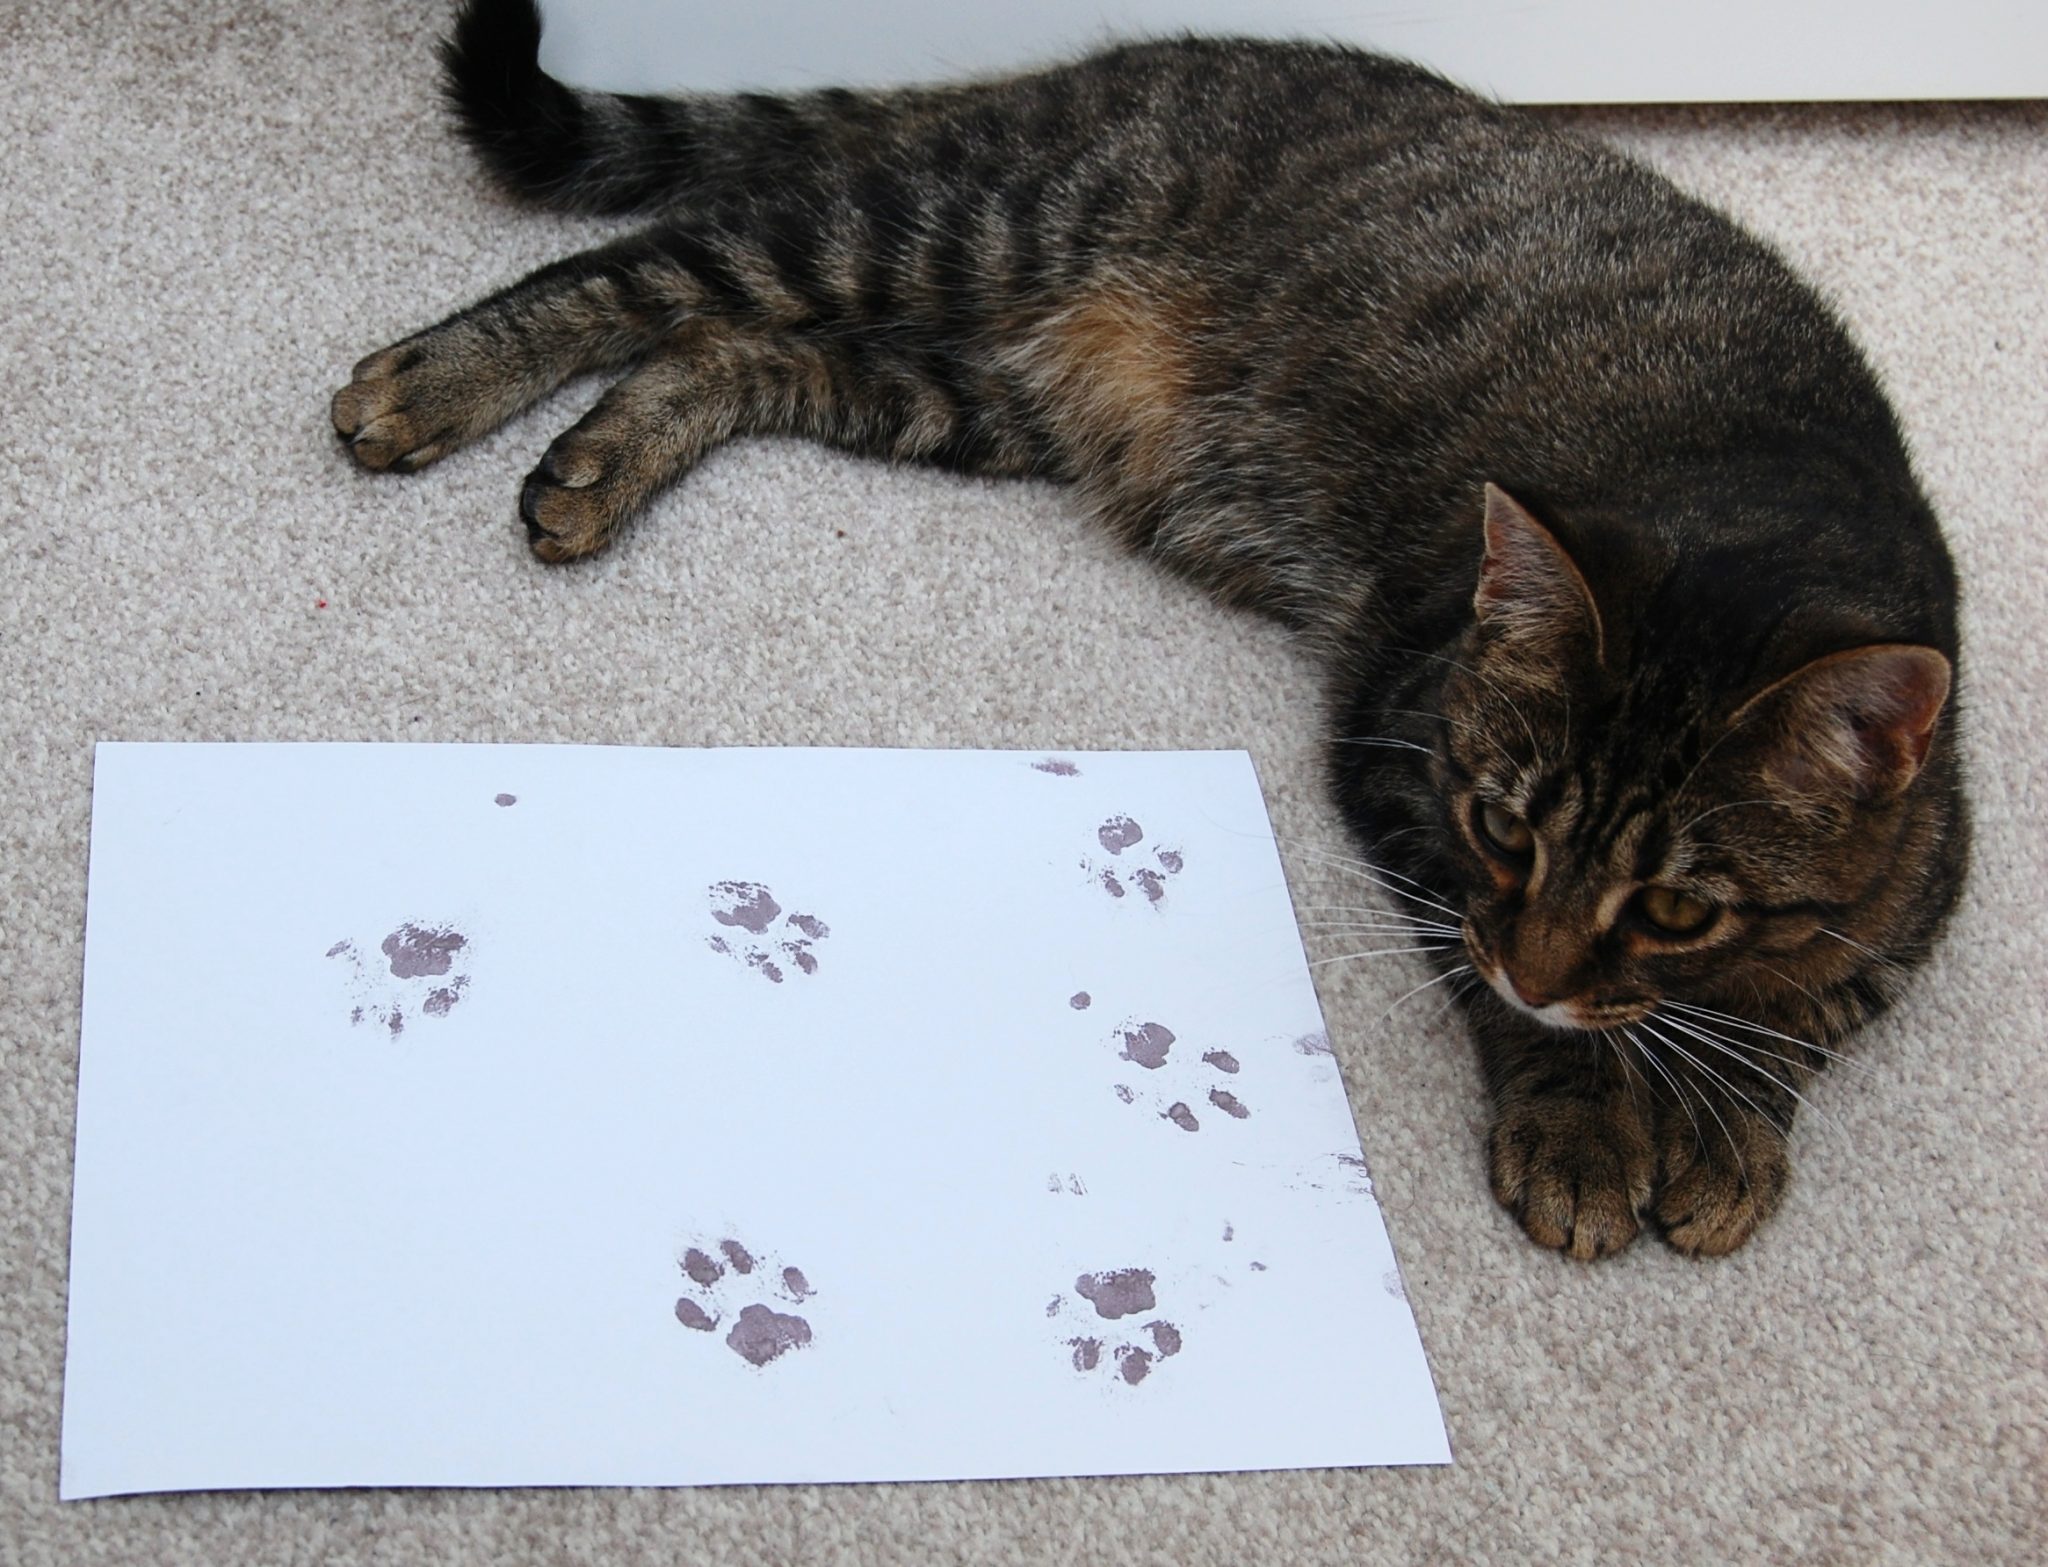 Tabby cat with her unique paw prints